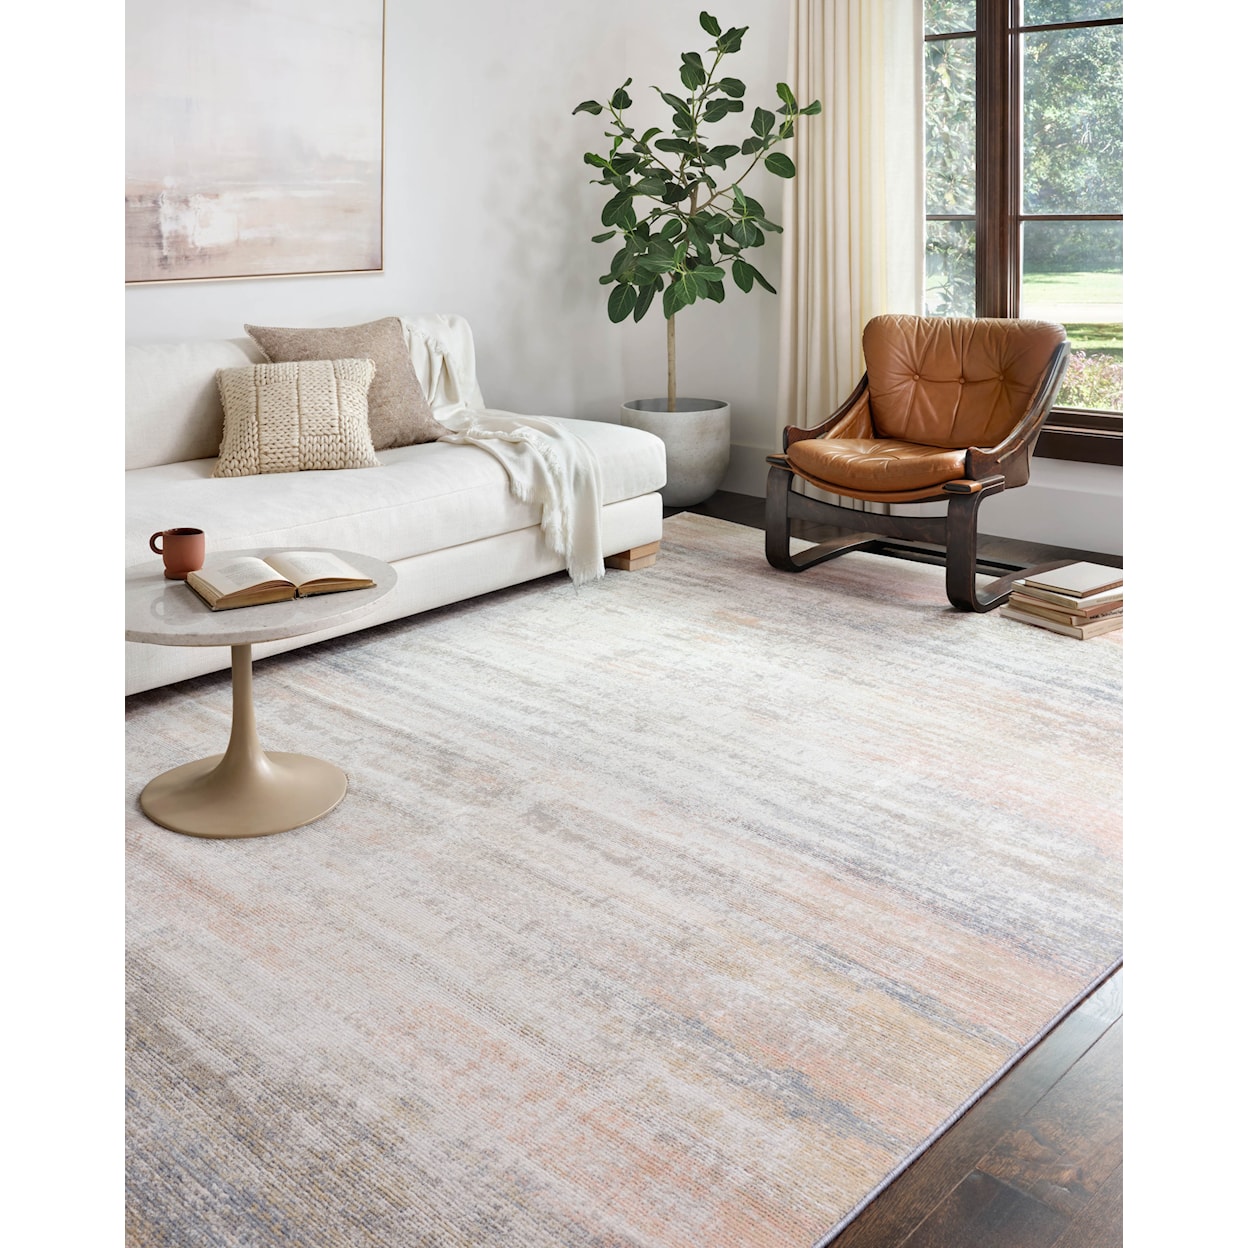 Reeds Rugs Lucia 5'2" x 7'7"  Rug